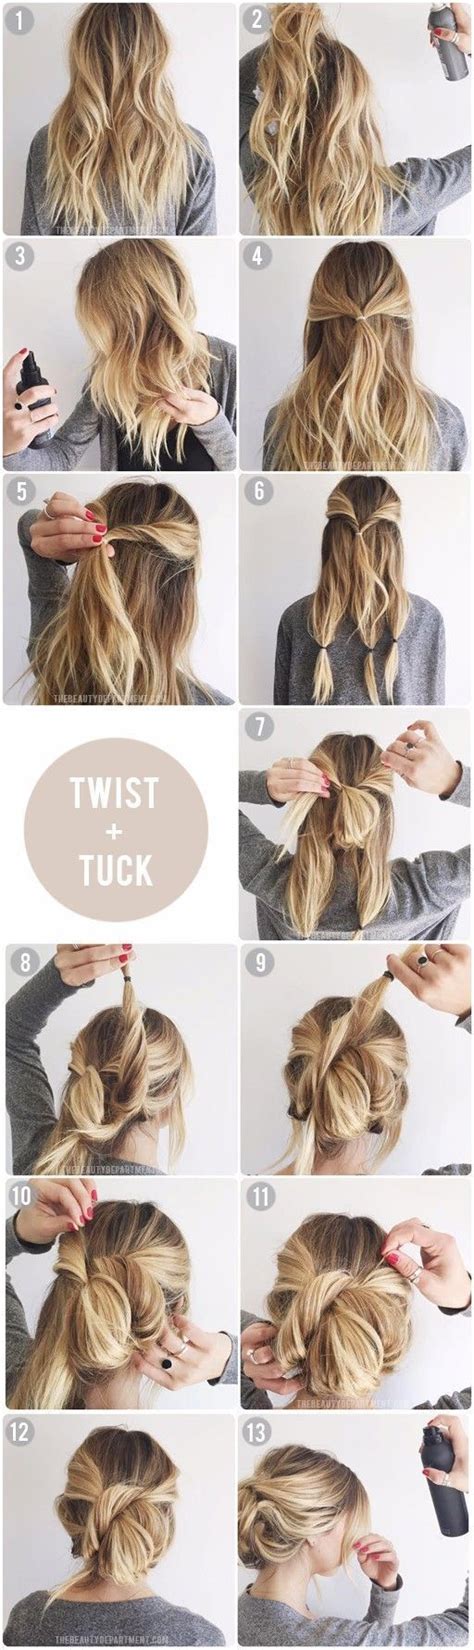 This Quick Easy Updos For Work For Hair Ideas Best Wedding Hair For Wedding Day Part